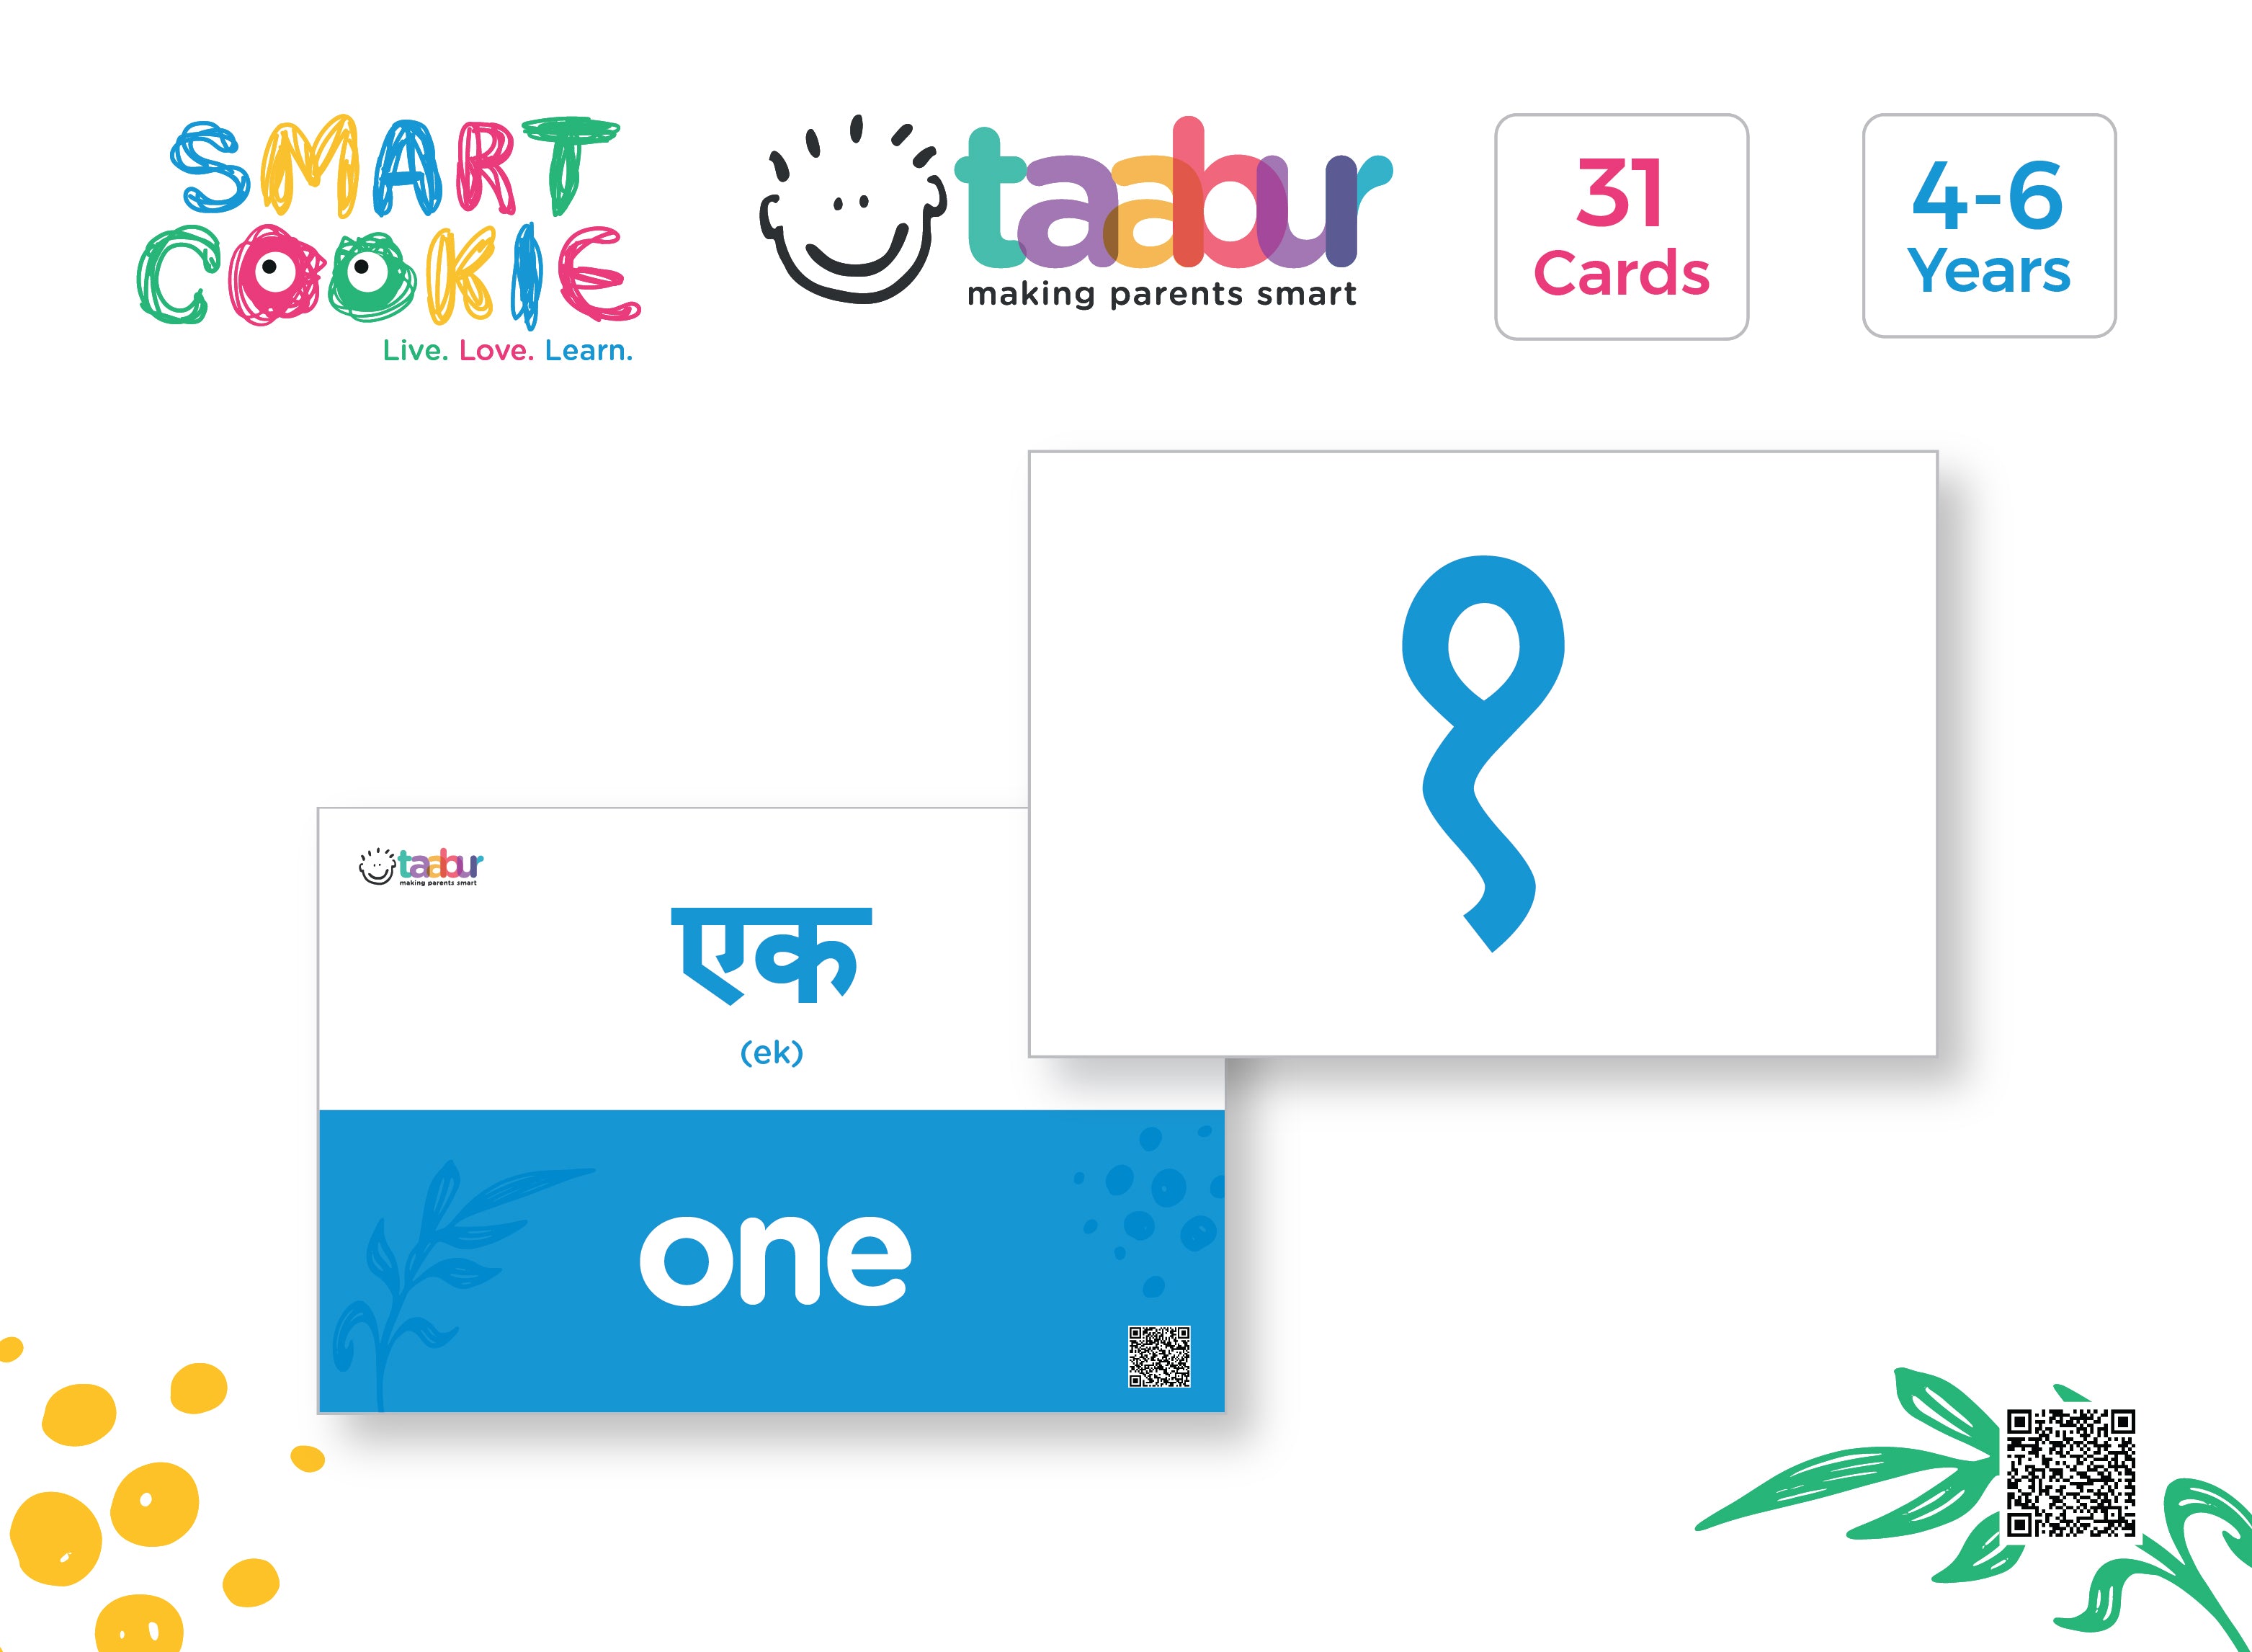 Hindi for Beginners - 4 Sets of Interactive Flashcards - for Kids Aged 2 to 6 Years Old